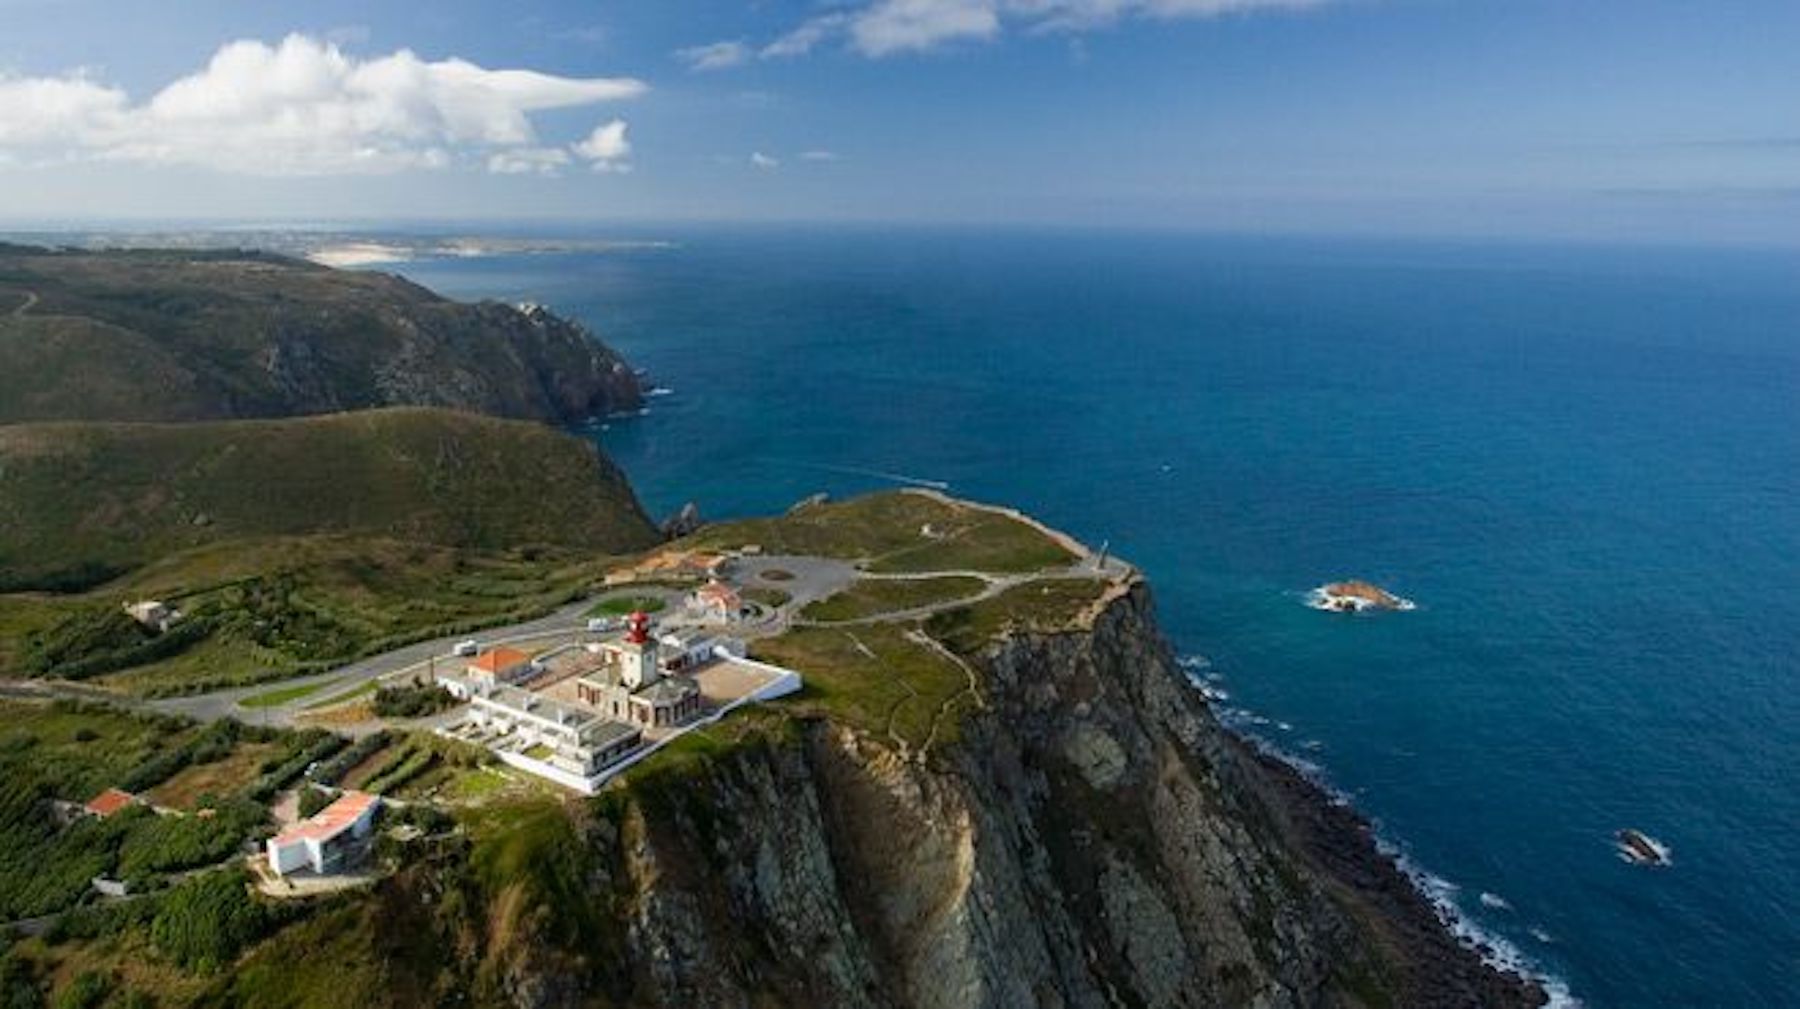 An aerial view of Cabo de Roca, Portugal depicting a large building atop of large cliff overlooking the ocean